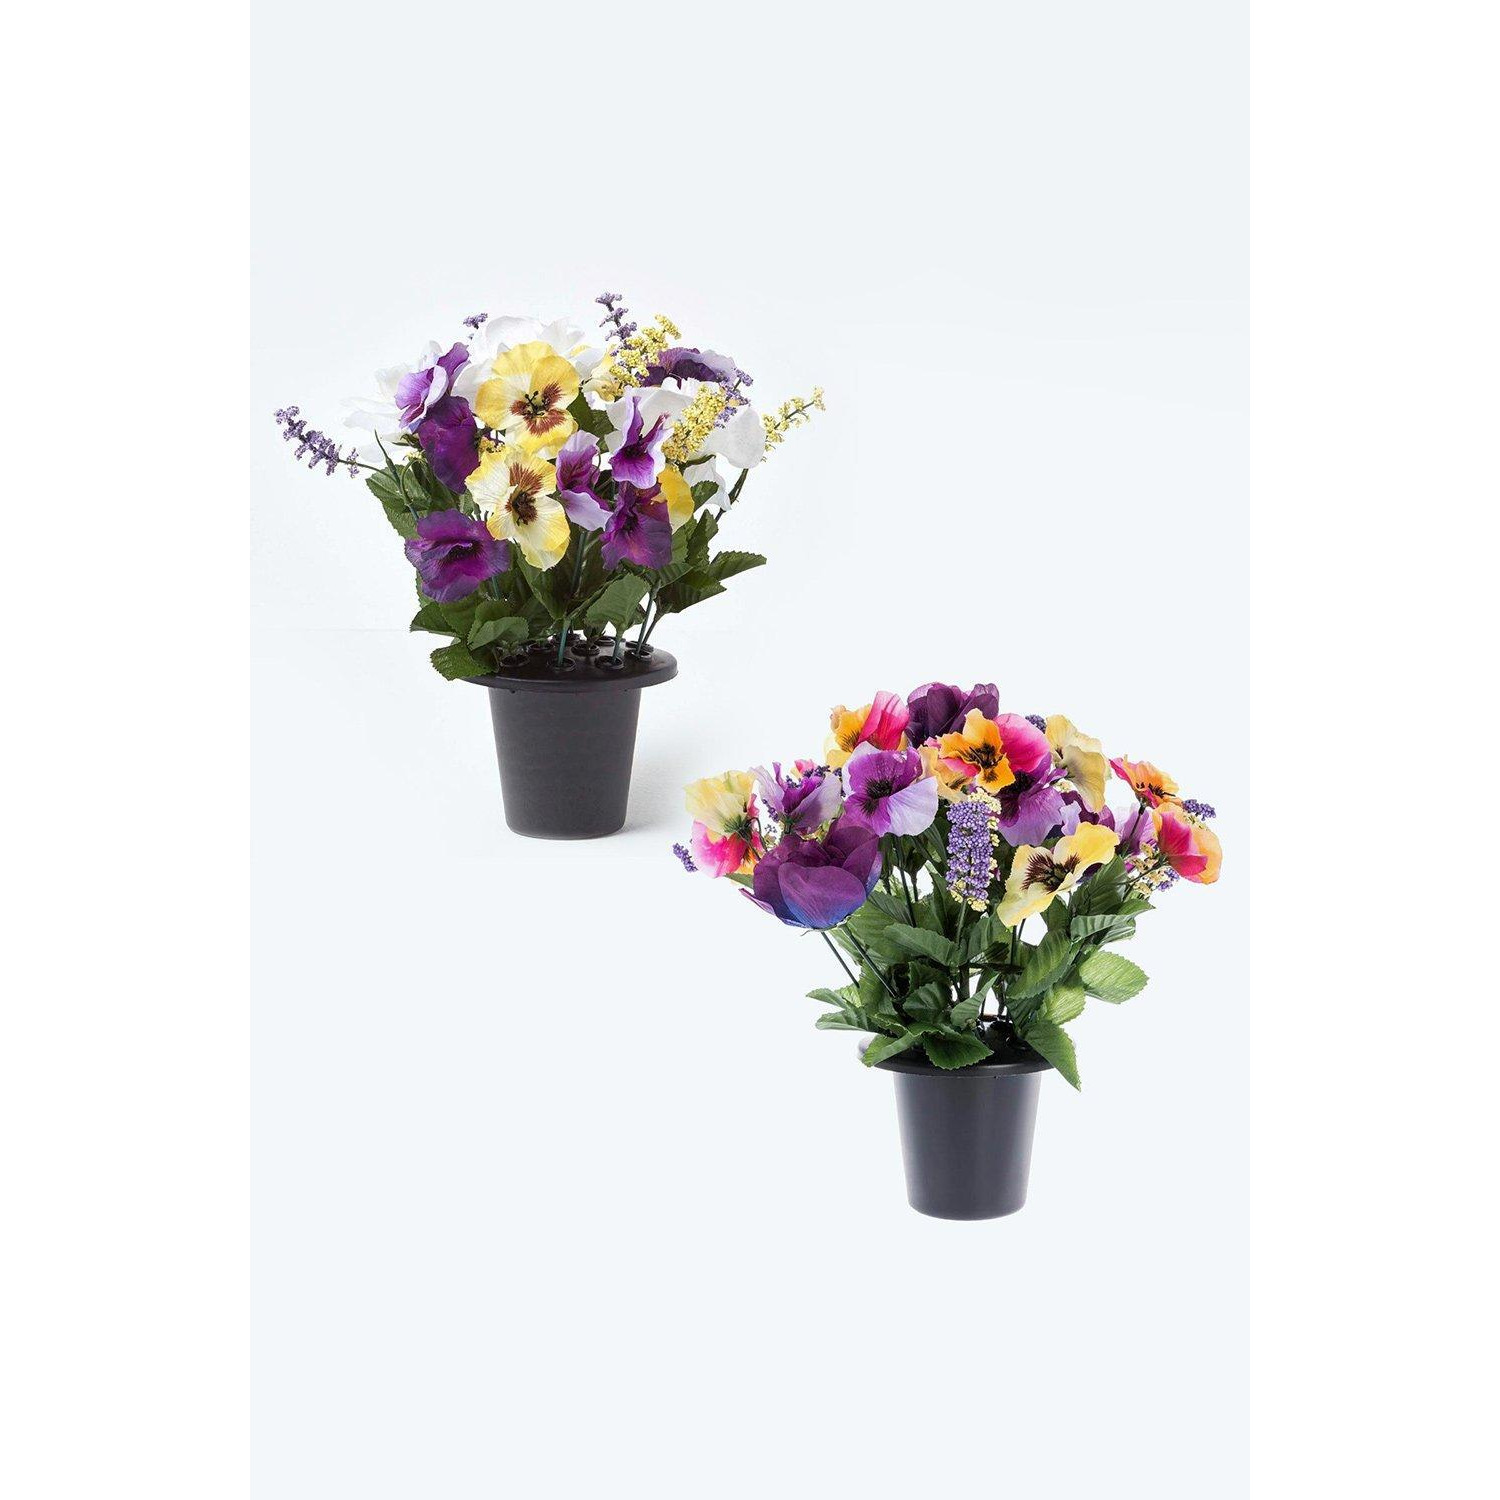 Set of 2 Roses Artificial Flowers in Grave Vases - image 1